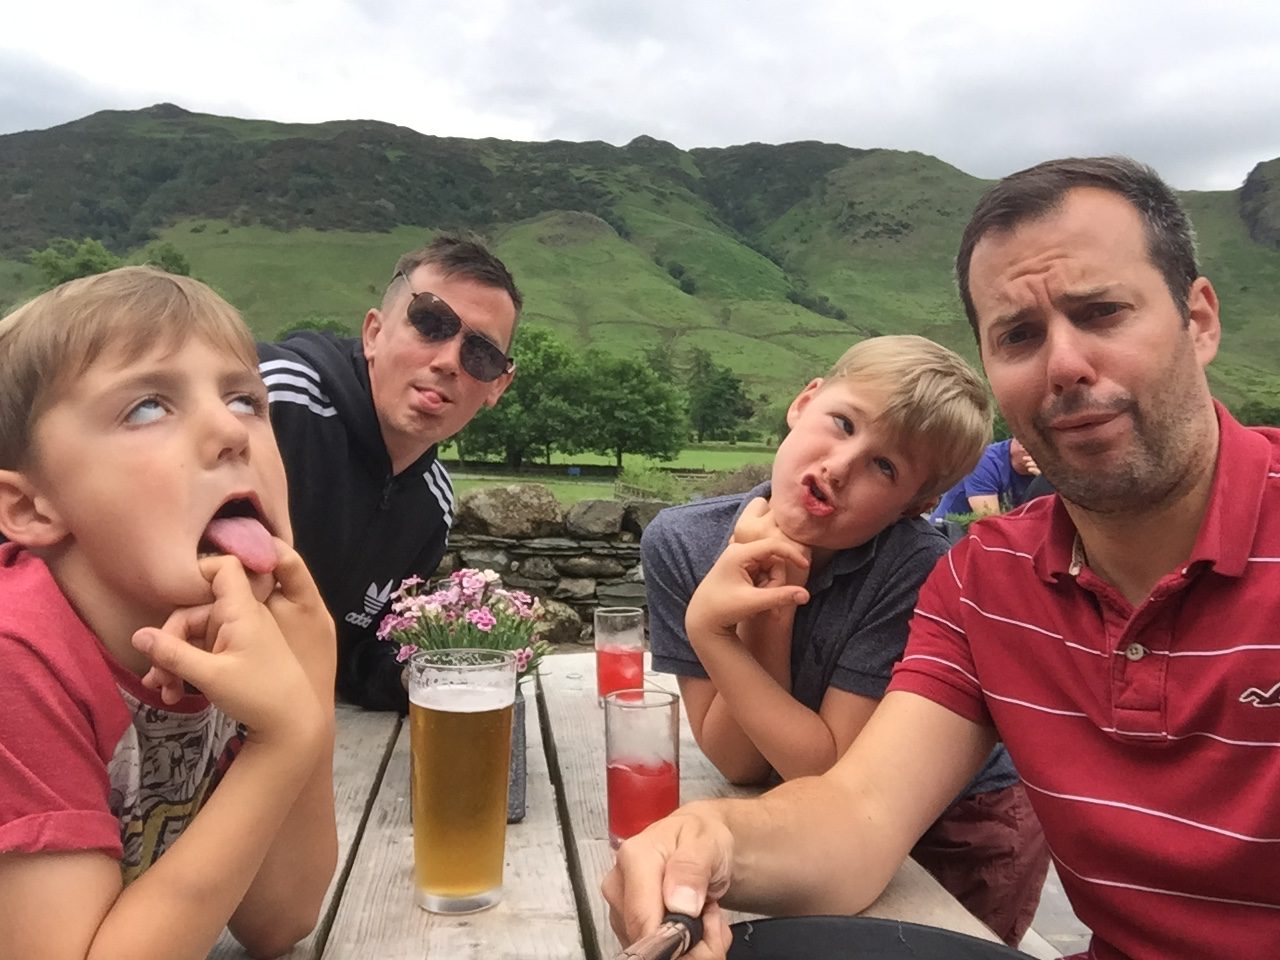 shared parental leave at REED - Peter Parking-Child with husband and boys pulling faces